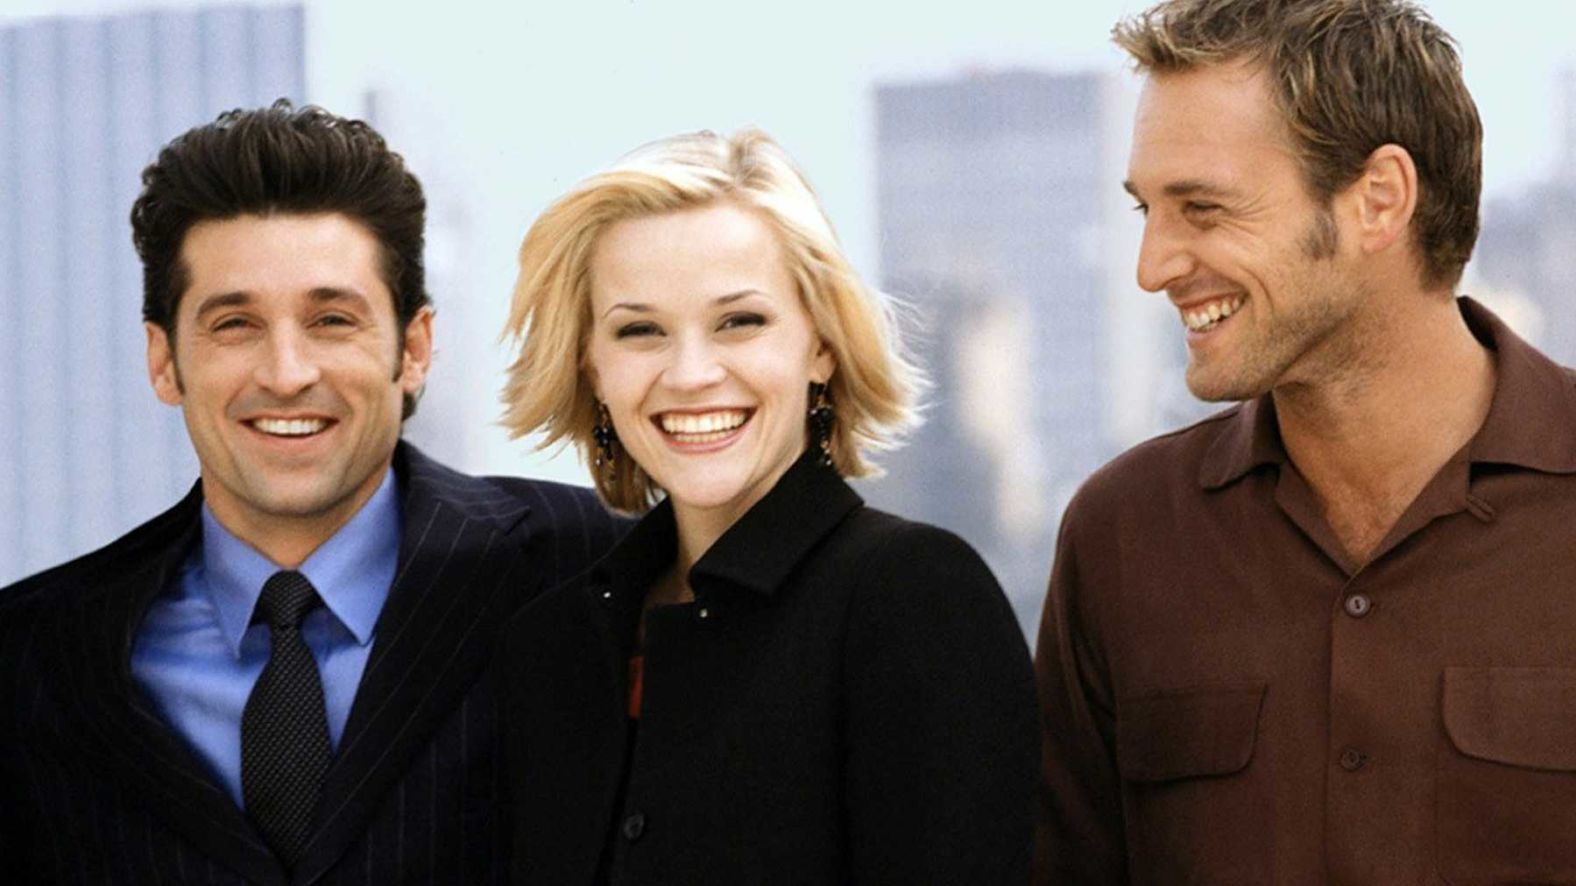 <strong>"Sweet Home Alabama" (2002):</strong> Josh Lucas and Patrick Dempsey vie for the affection of Reese Witherspoon in this not-quite summer release (I'm allowing it!) about a Southern belle who gets a ring and has to unring a bell from her past. Making the perfect rom-com, like going home, is never easy, but heck if Witherspoon doesn't always make it look like a whole lotta fun.